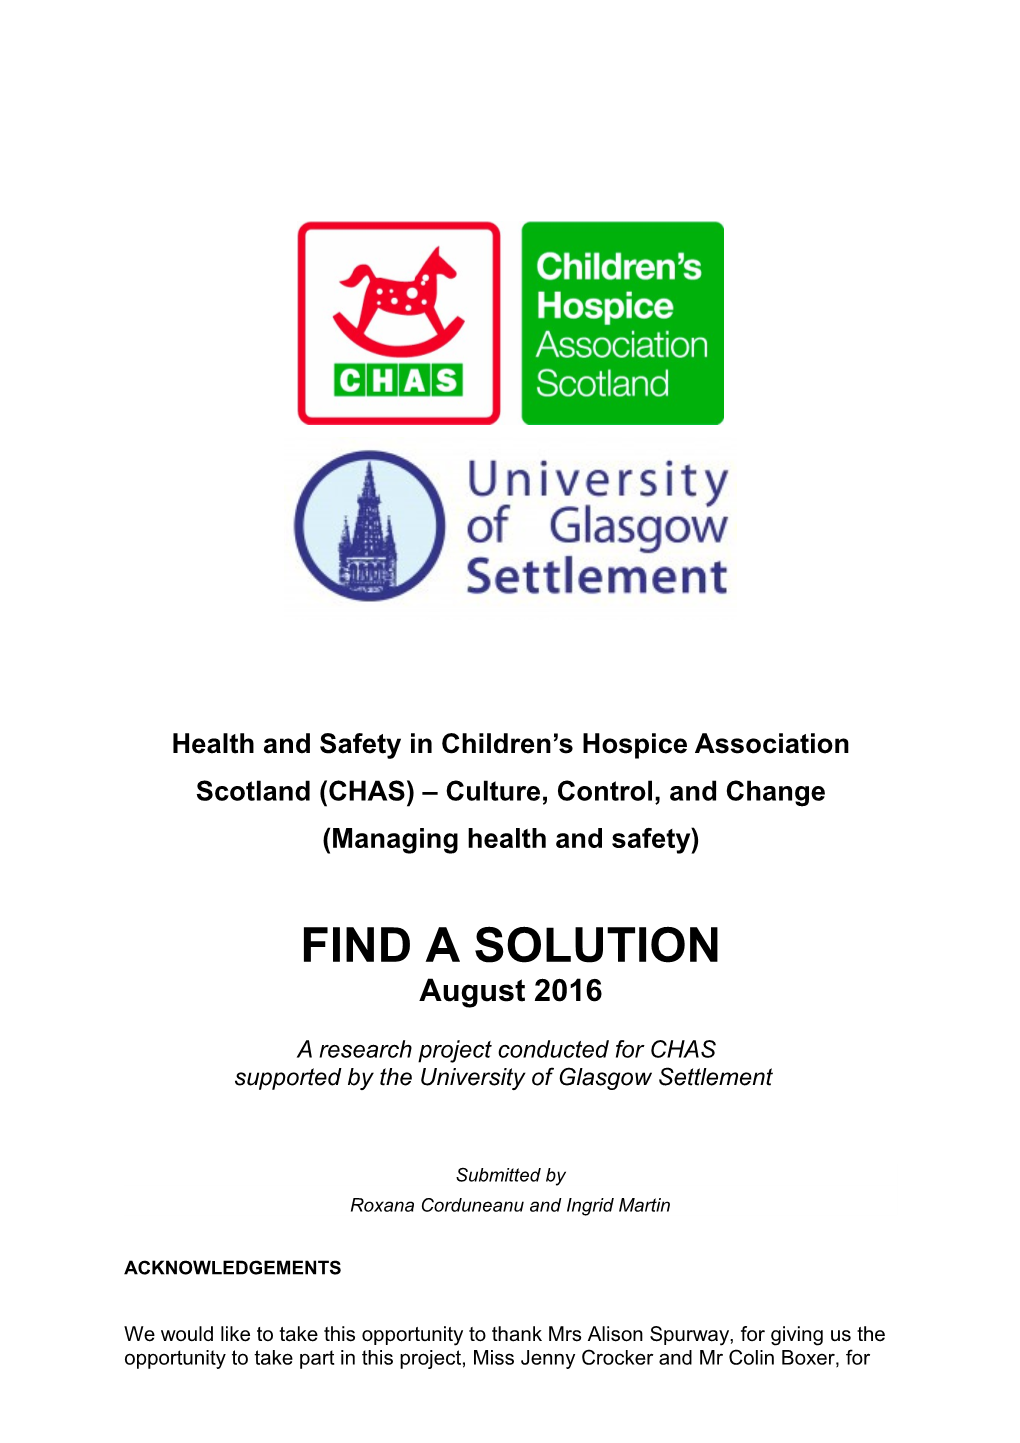 Health and Safety in Children S Hospice Association Scotland (CHAS) Culture, Control